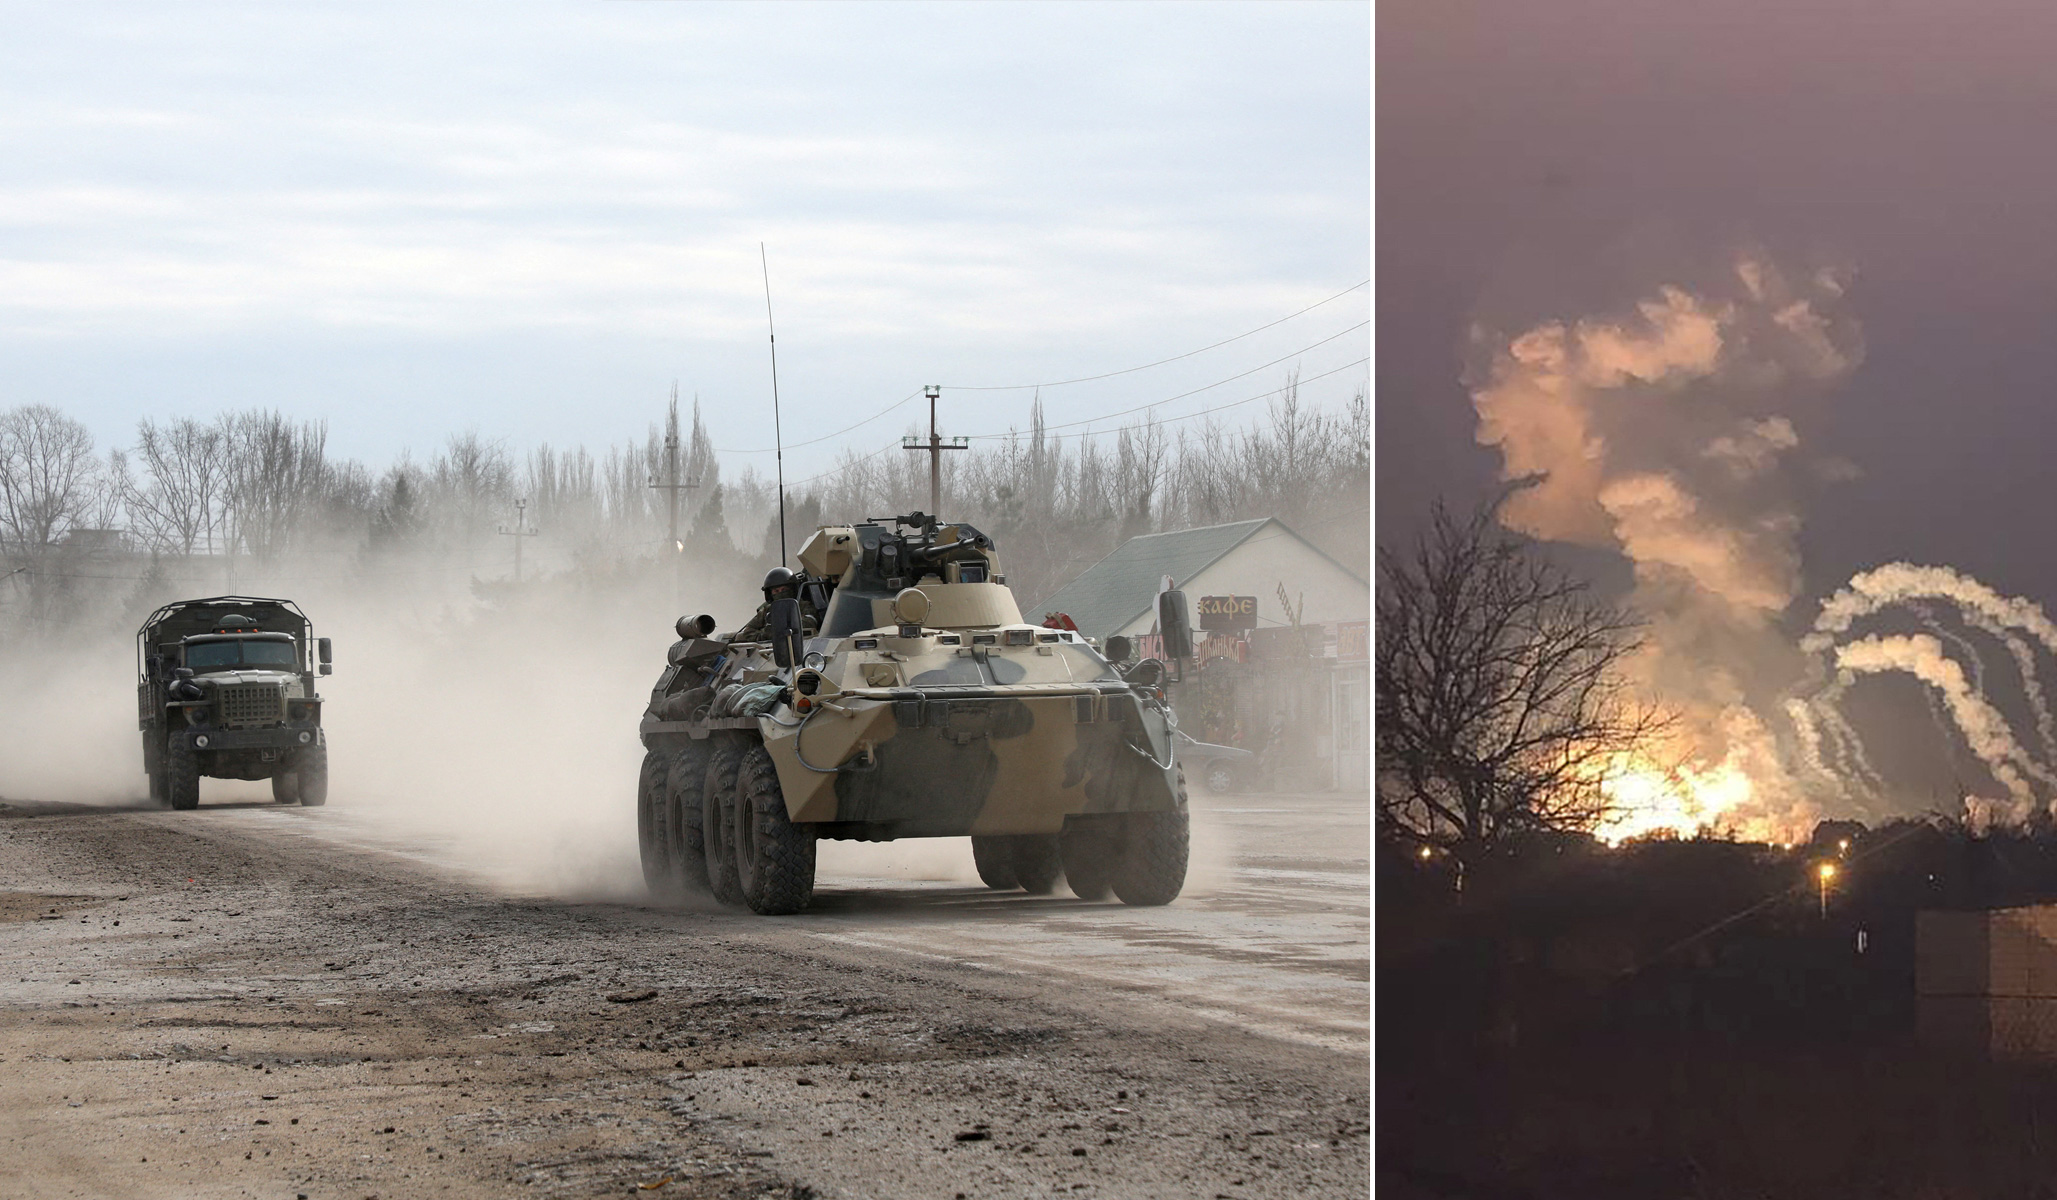 Bloodshed in Ukraine: Hundreds of Casualties Reported as Nationwide Russian Assault Continues